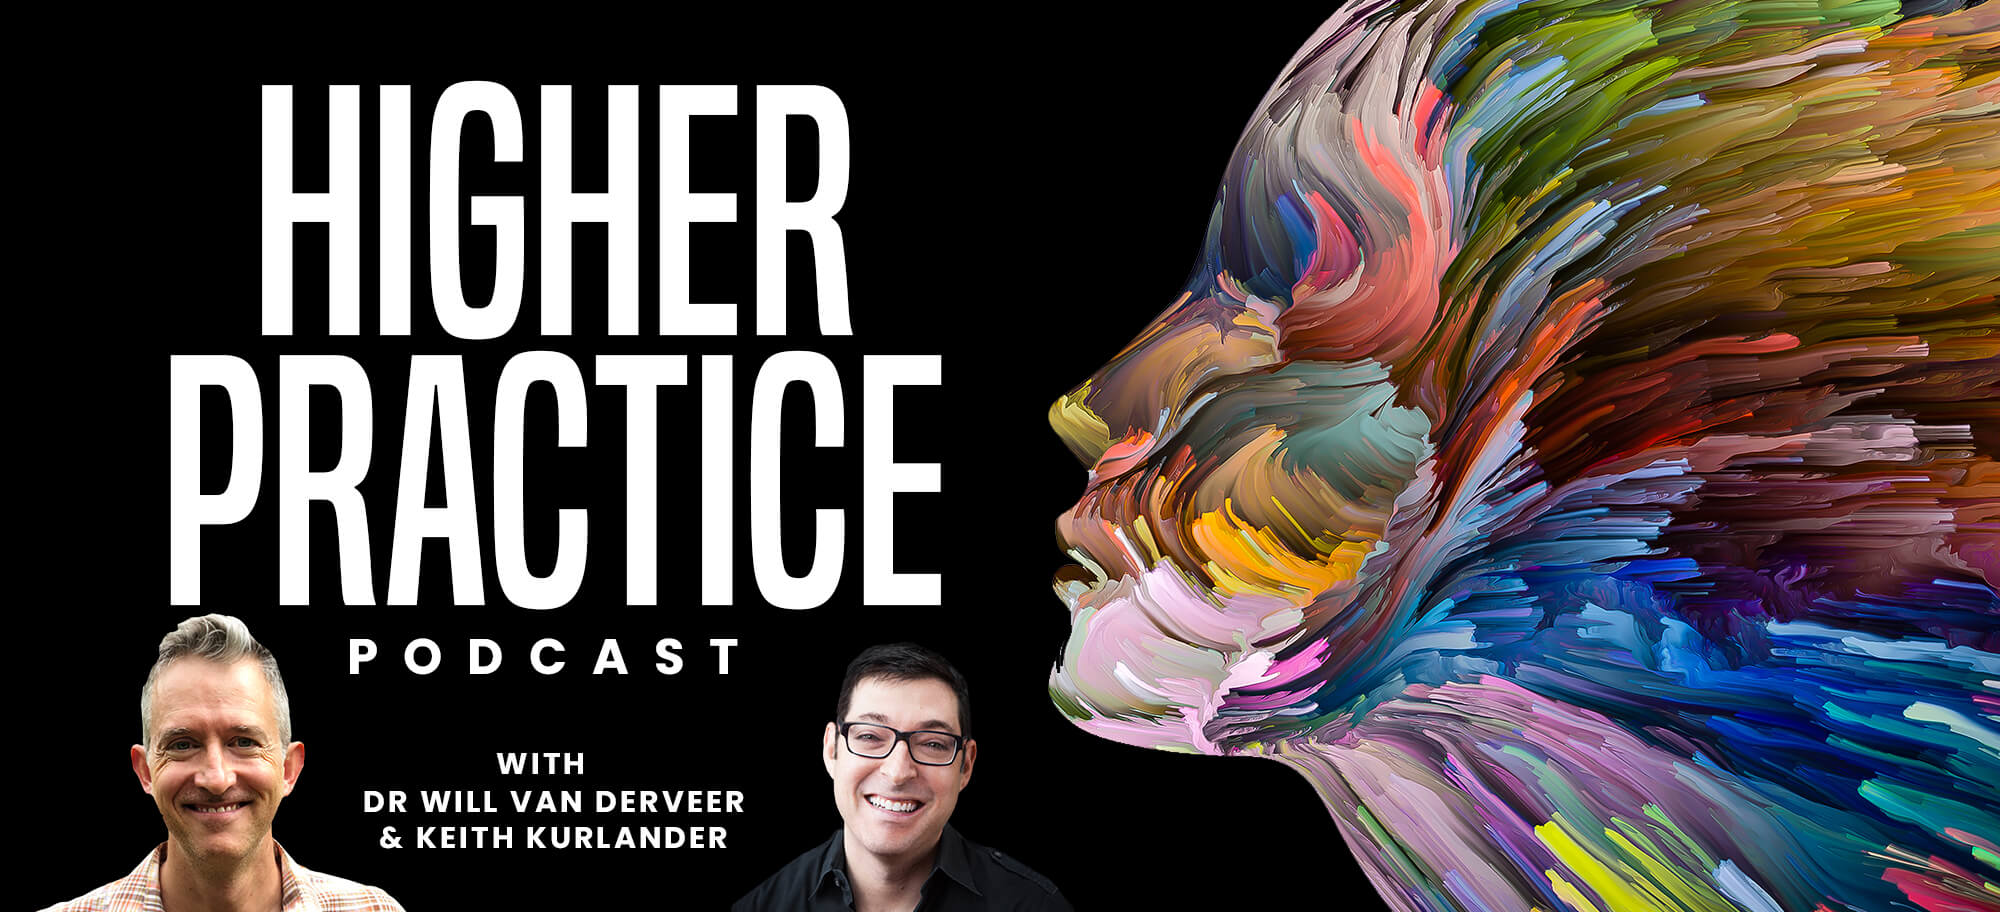 Higher Practice Podcast